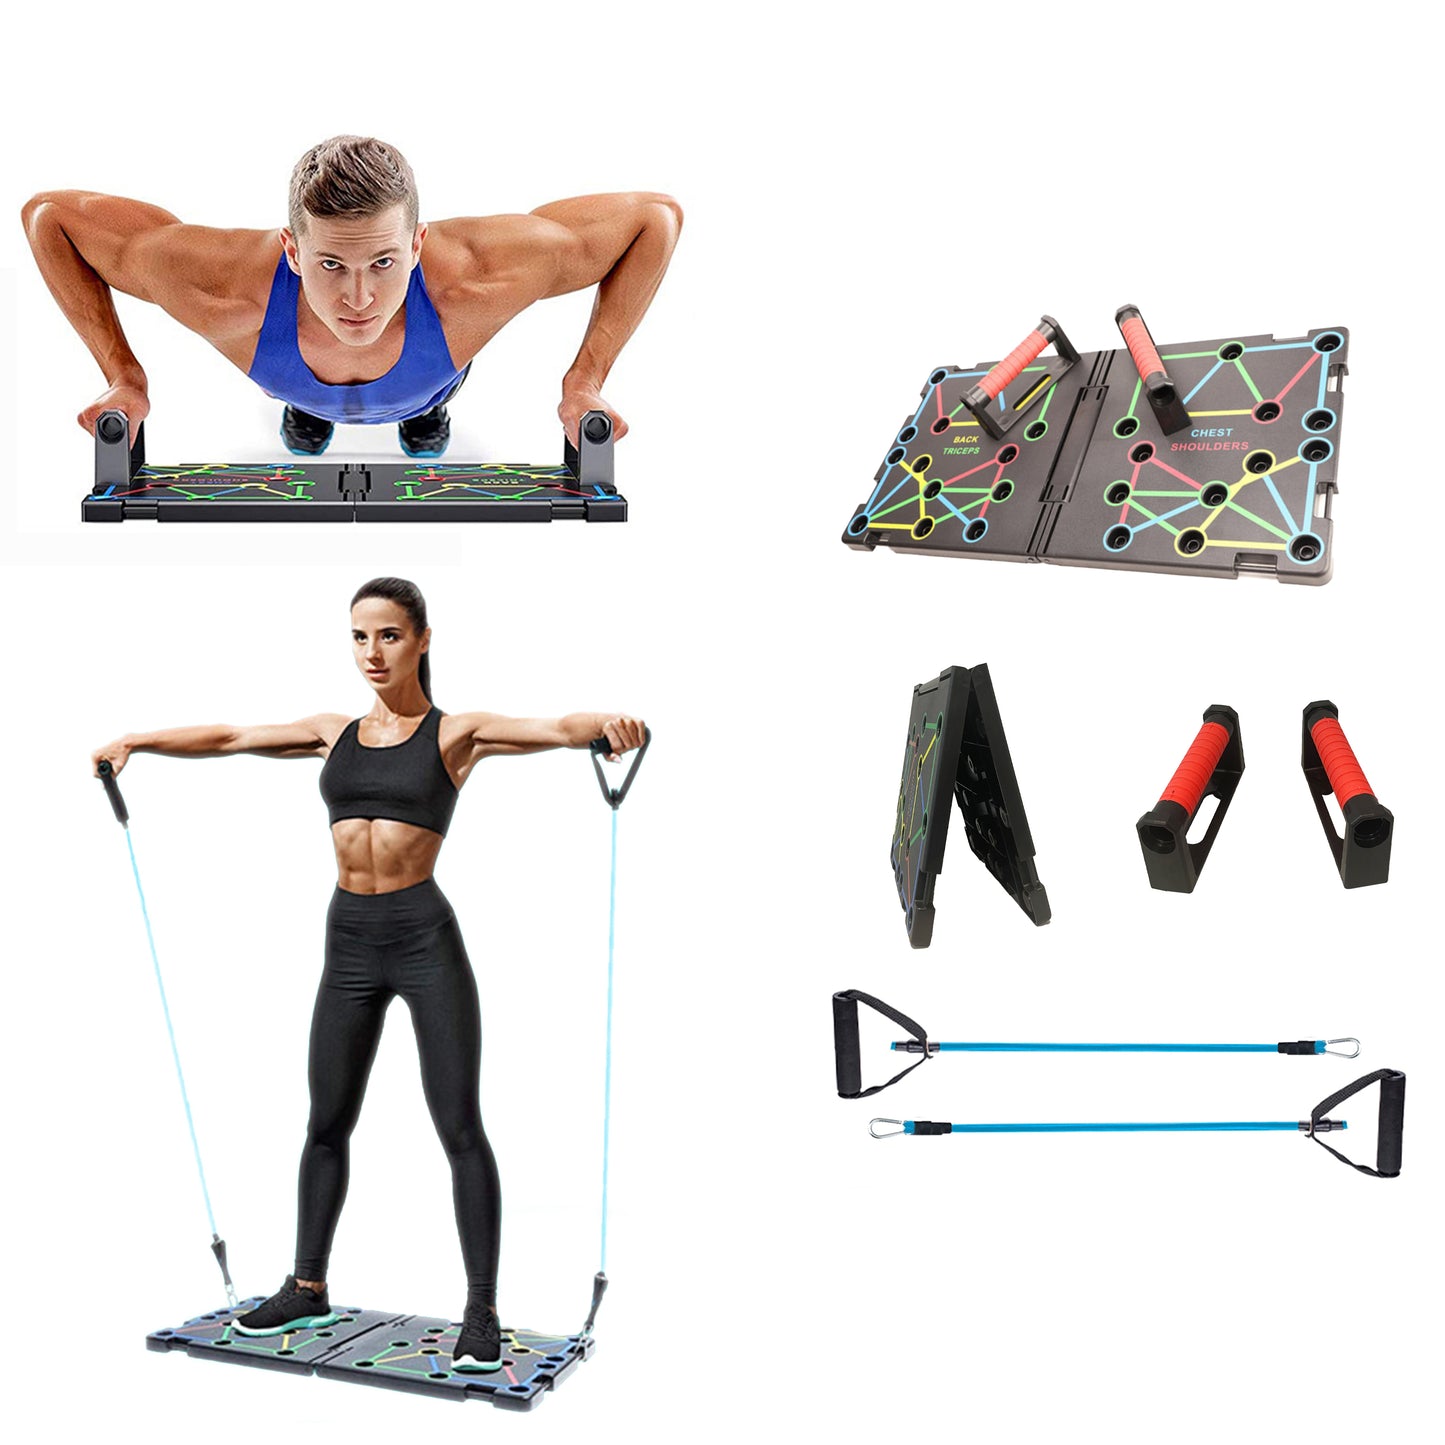 9-in-1 Push Up Board System - Complete Upper Body Workout Kit